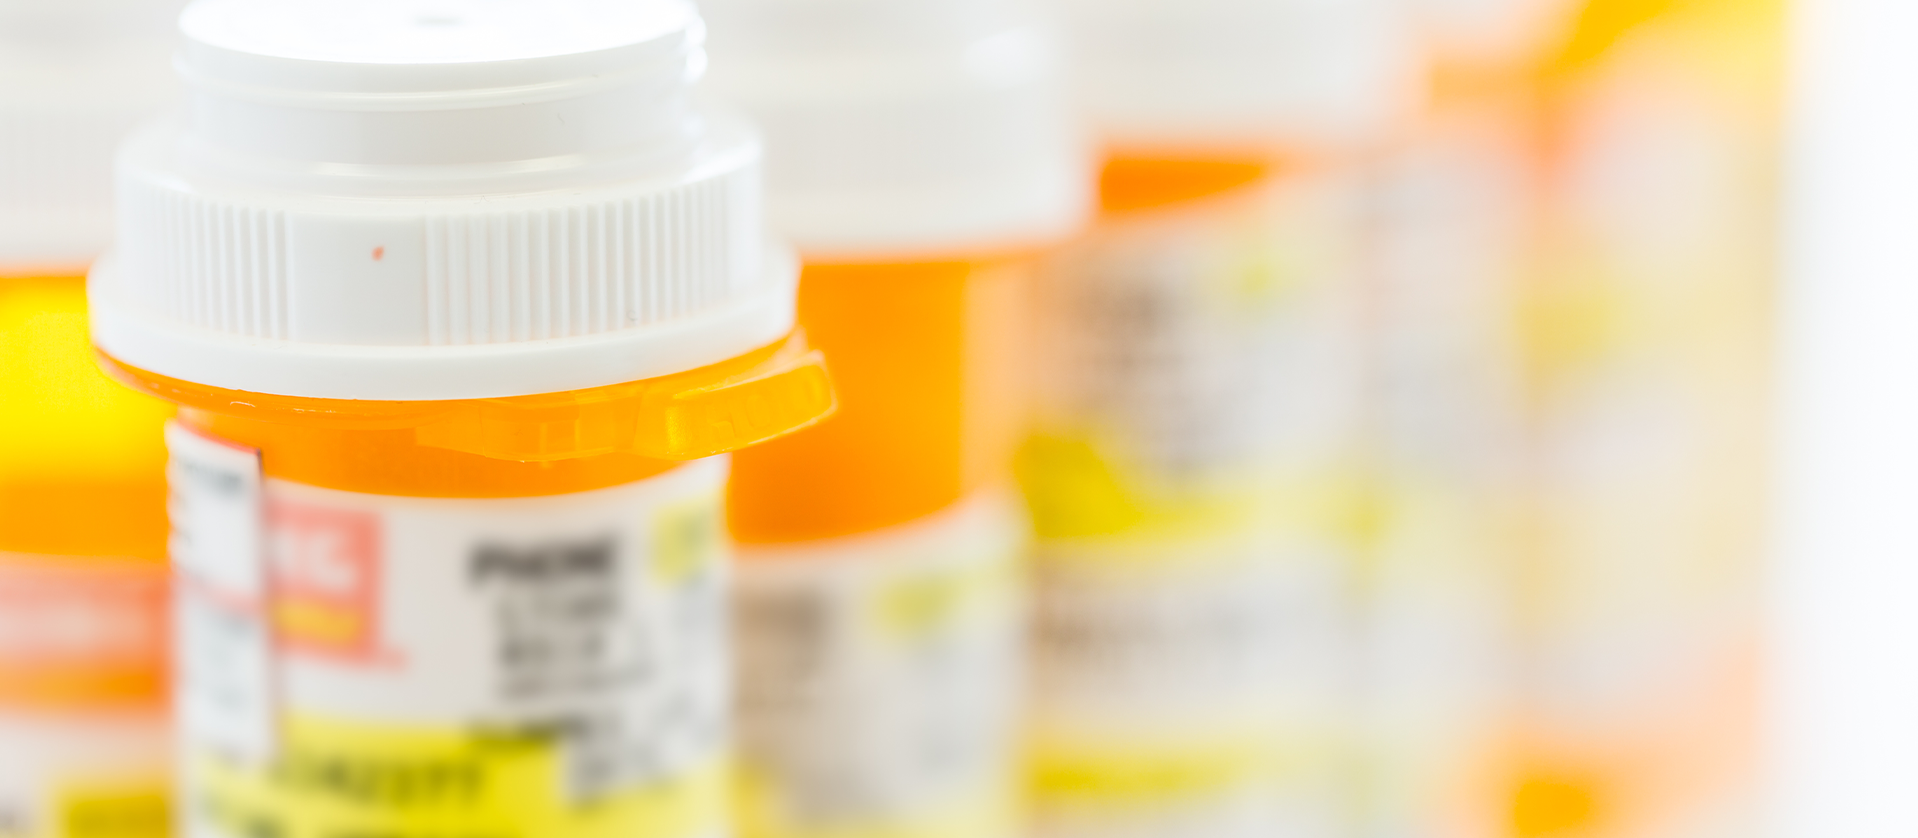 Close-up image of orange and white prescription medicine bottles, with focus on the front bottle cap while rest are blurred in the background. Labels are partially visible but details are obscured, demonstrating an issue relevant to